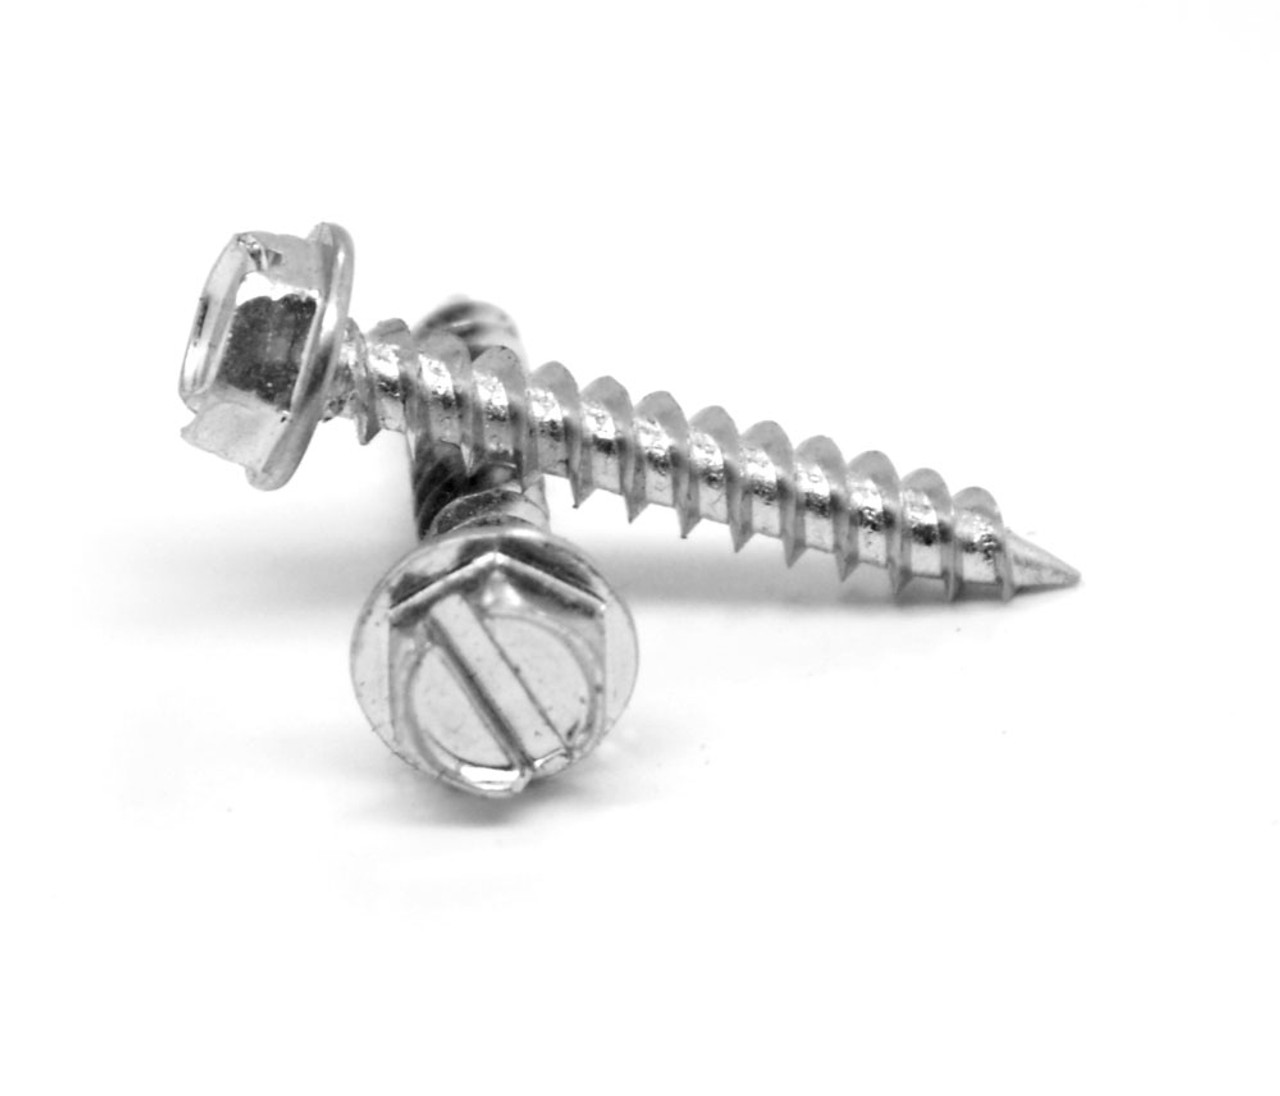 #10-16 x 1" (FT) 1/4" AF Self-Piercing Sheet Metal Screw Slotted Hex Washer Head Stainless Steel 18-8